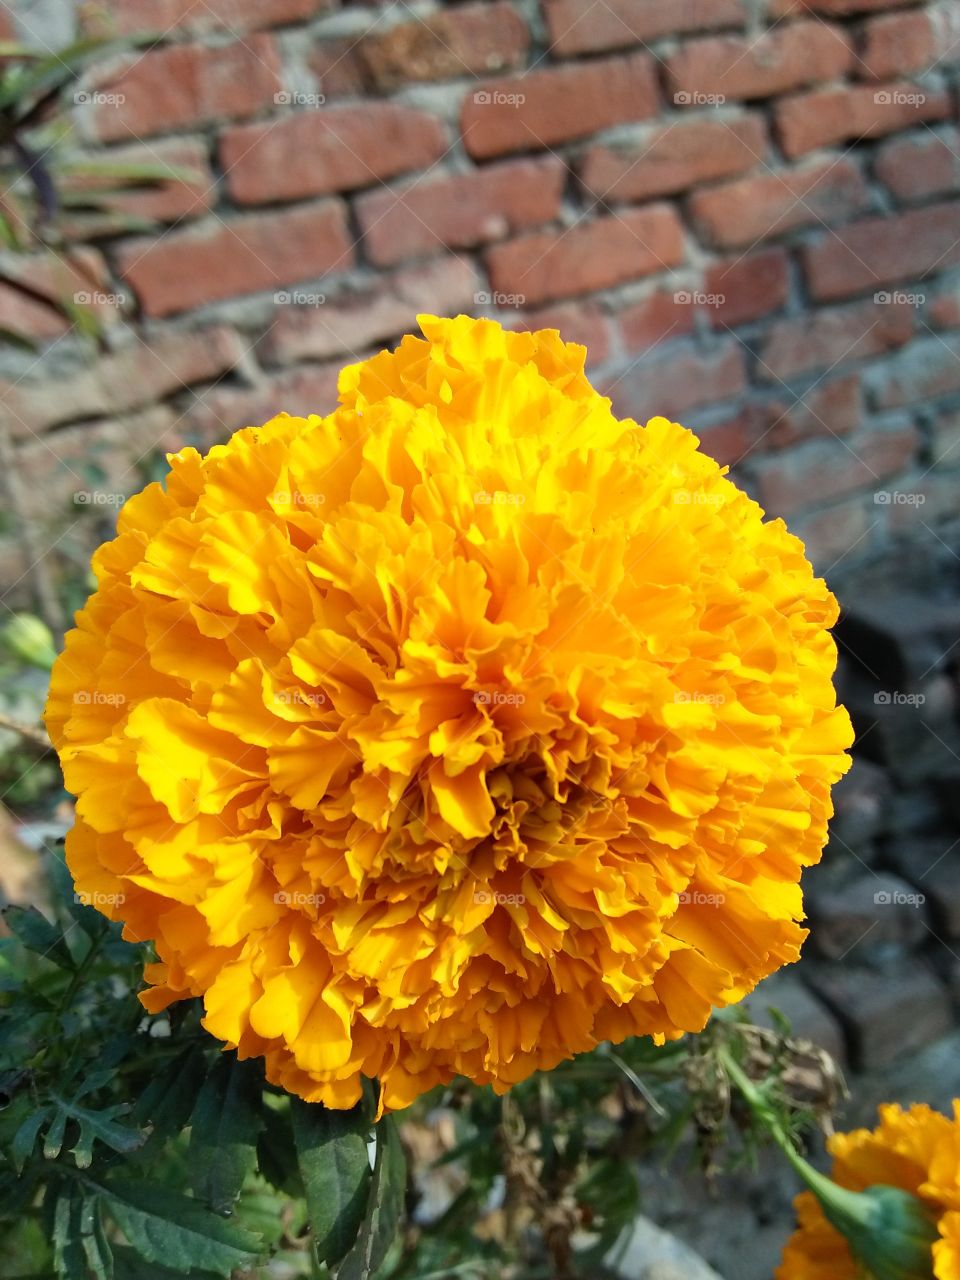 Marigold flower full grown beautifully captured from smartphone camera